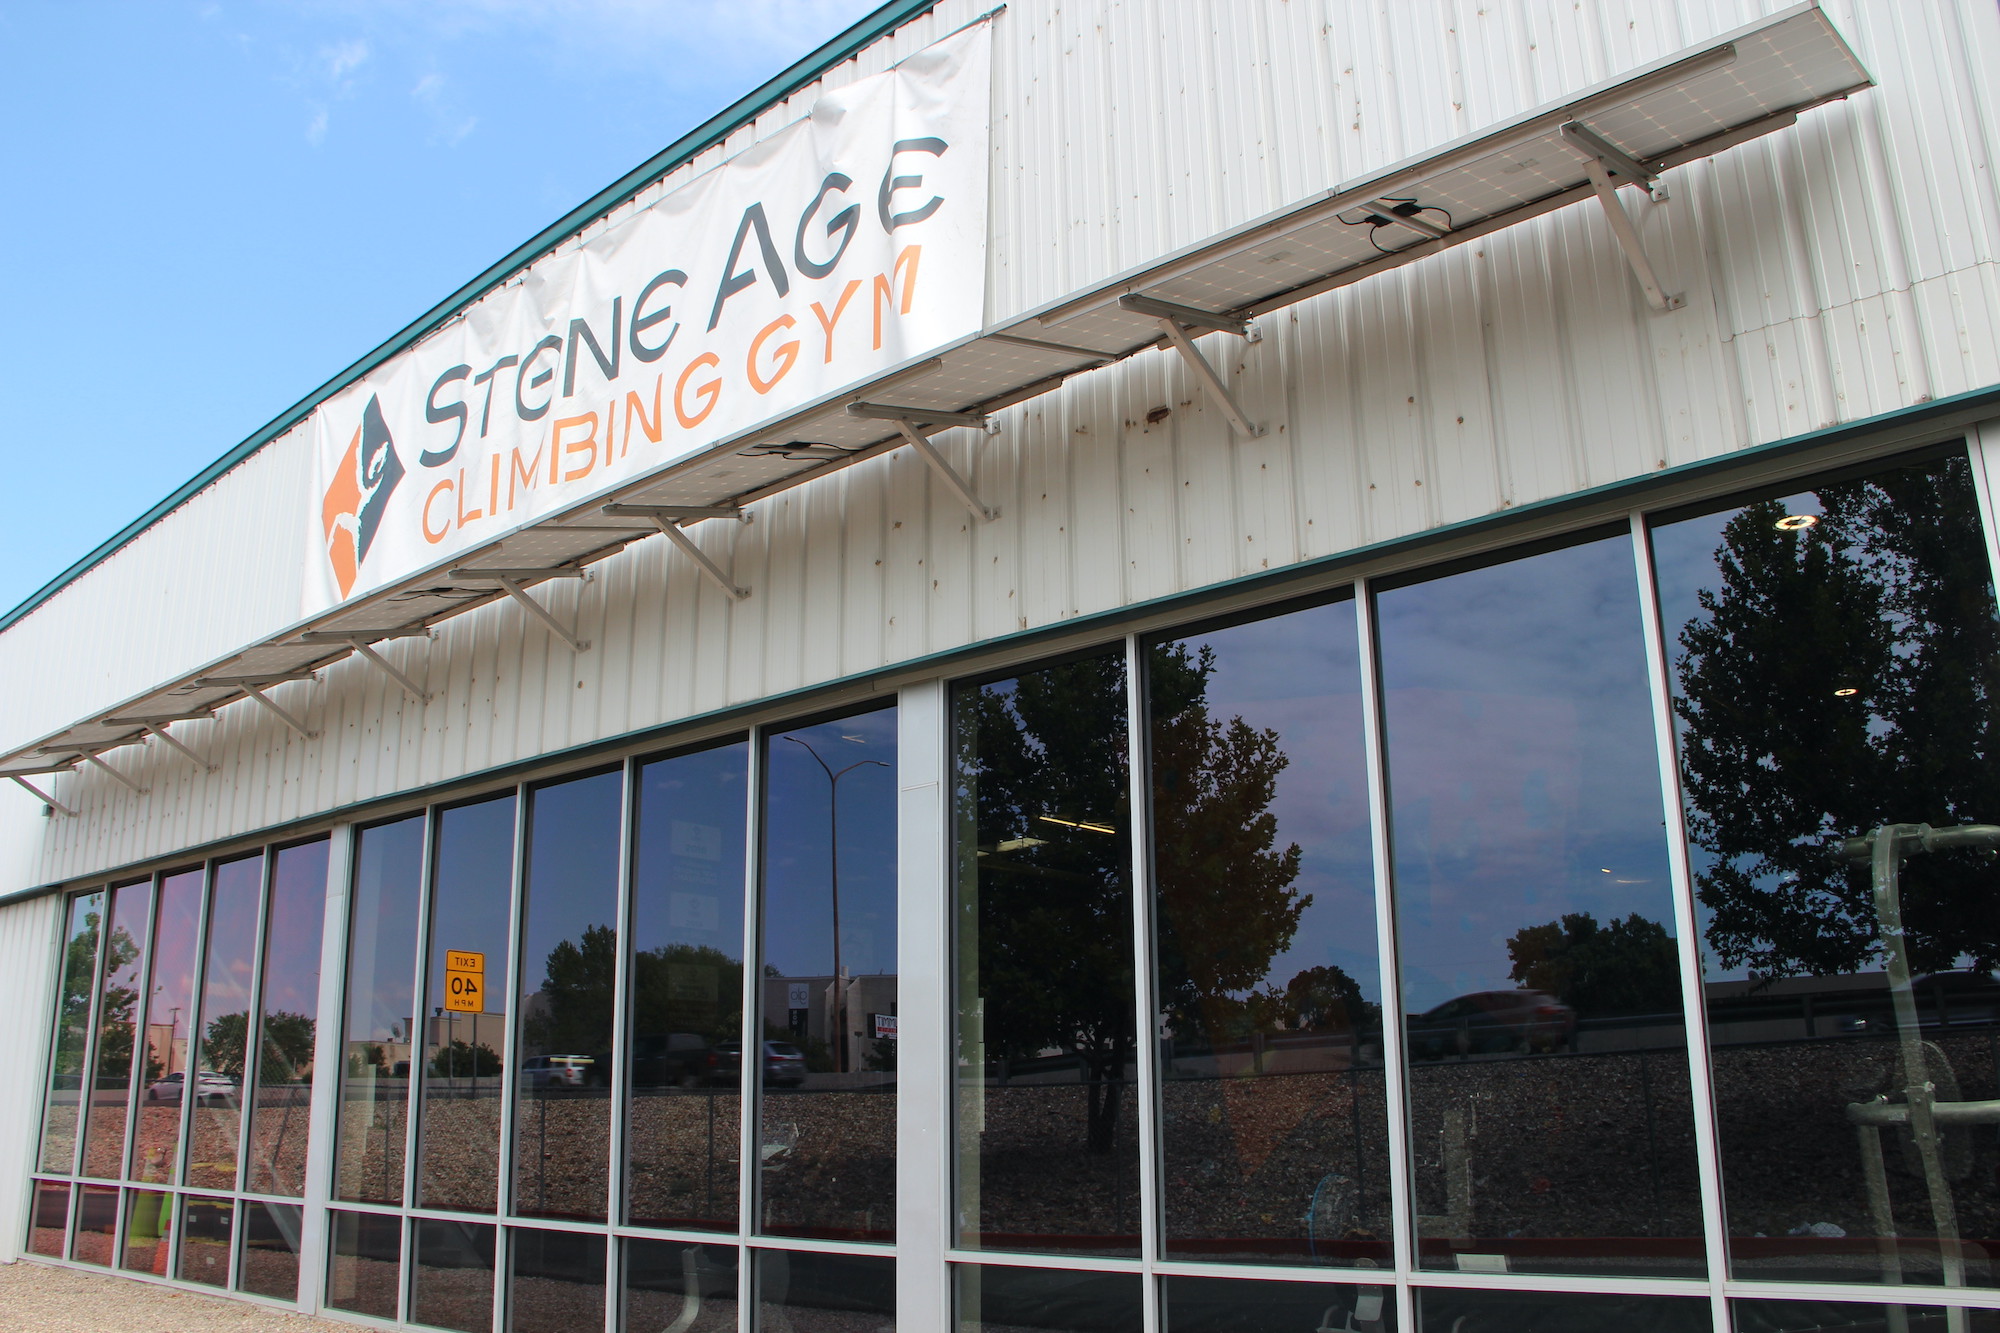 Picture of Stone Age Climbing Gym Midtown 4130 Cutler Ave NE, Albuquerque, NM 87110